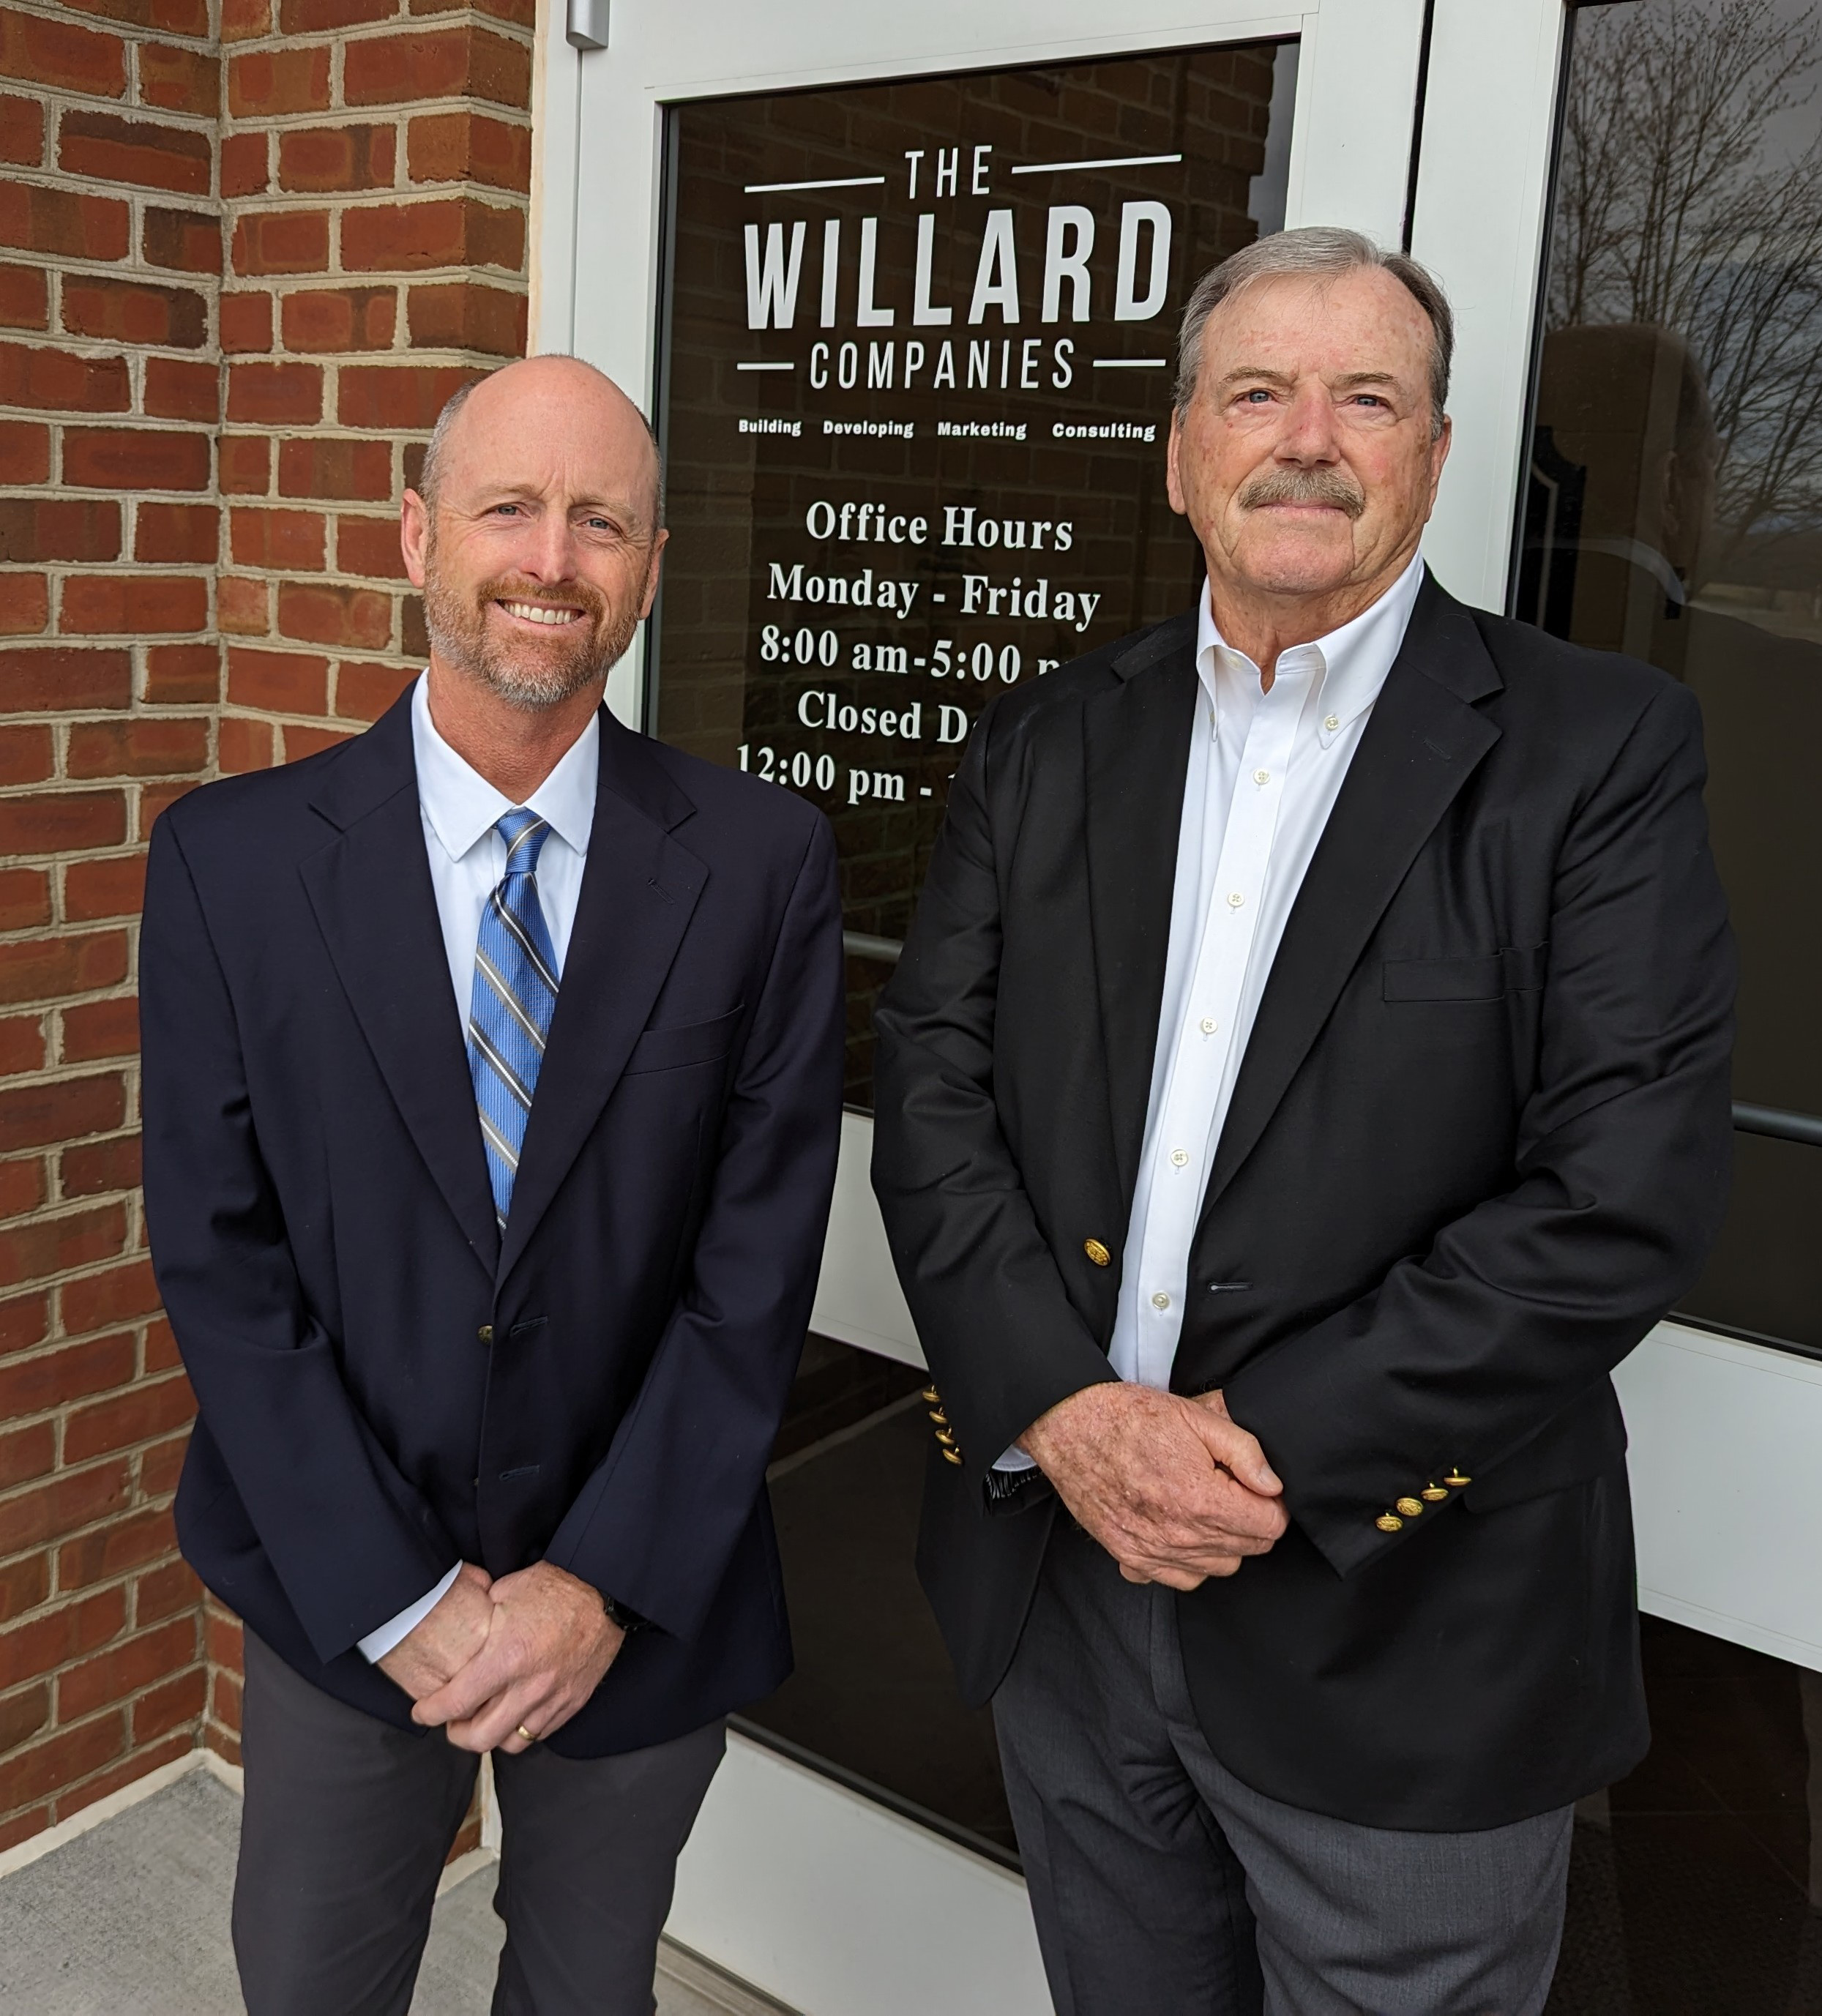 Ronald L. Willard II (left) has been taking over operations of The Willard Companies from his father, Ronald Willard Sr., over the past several years.